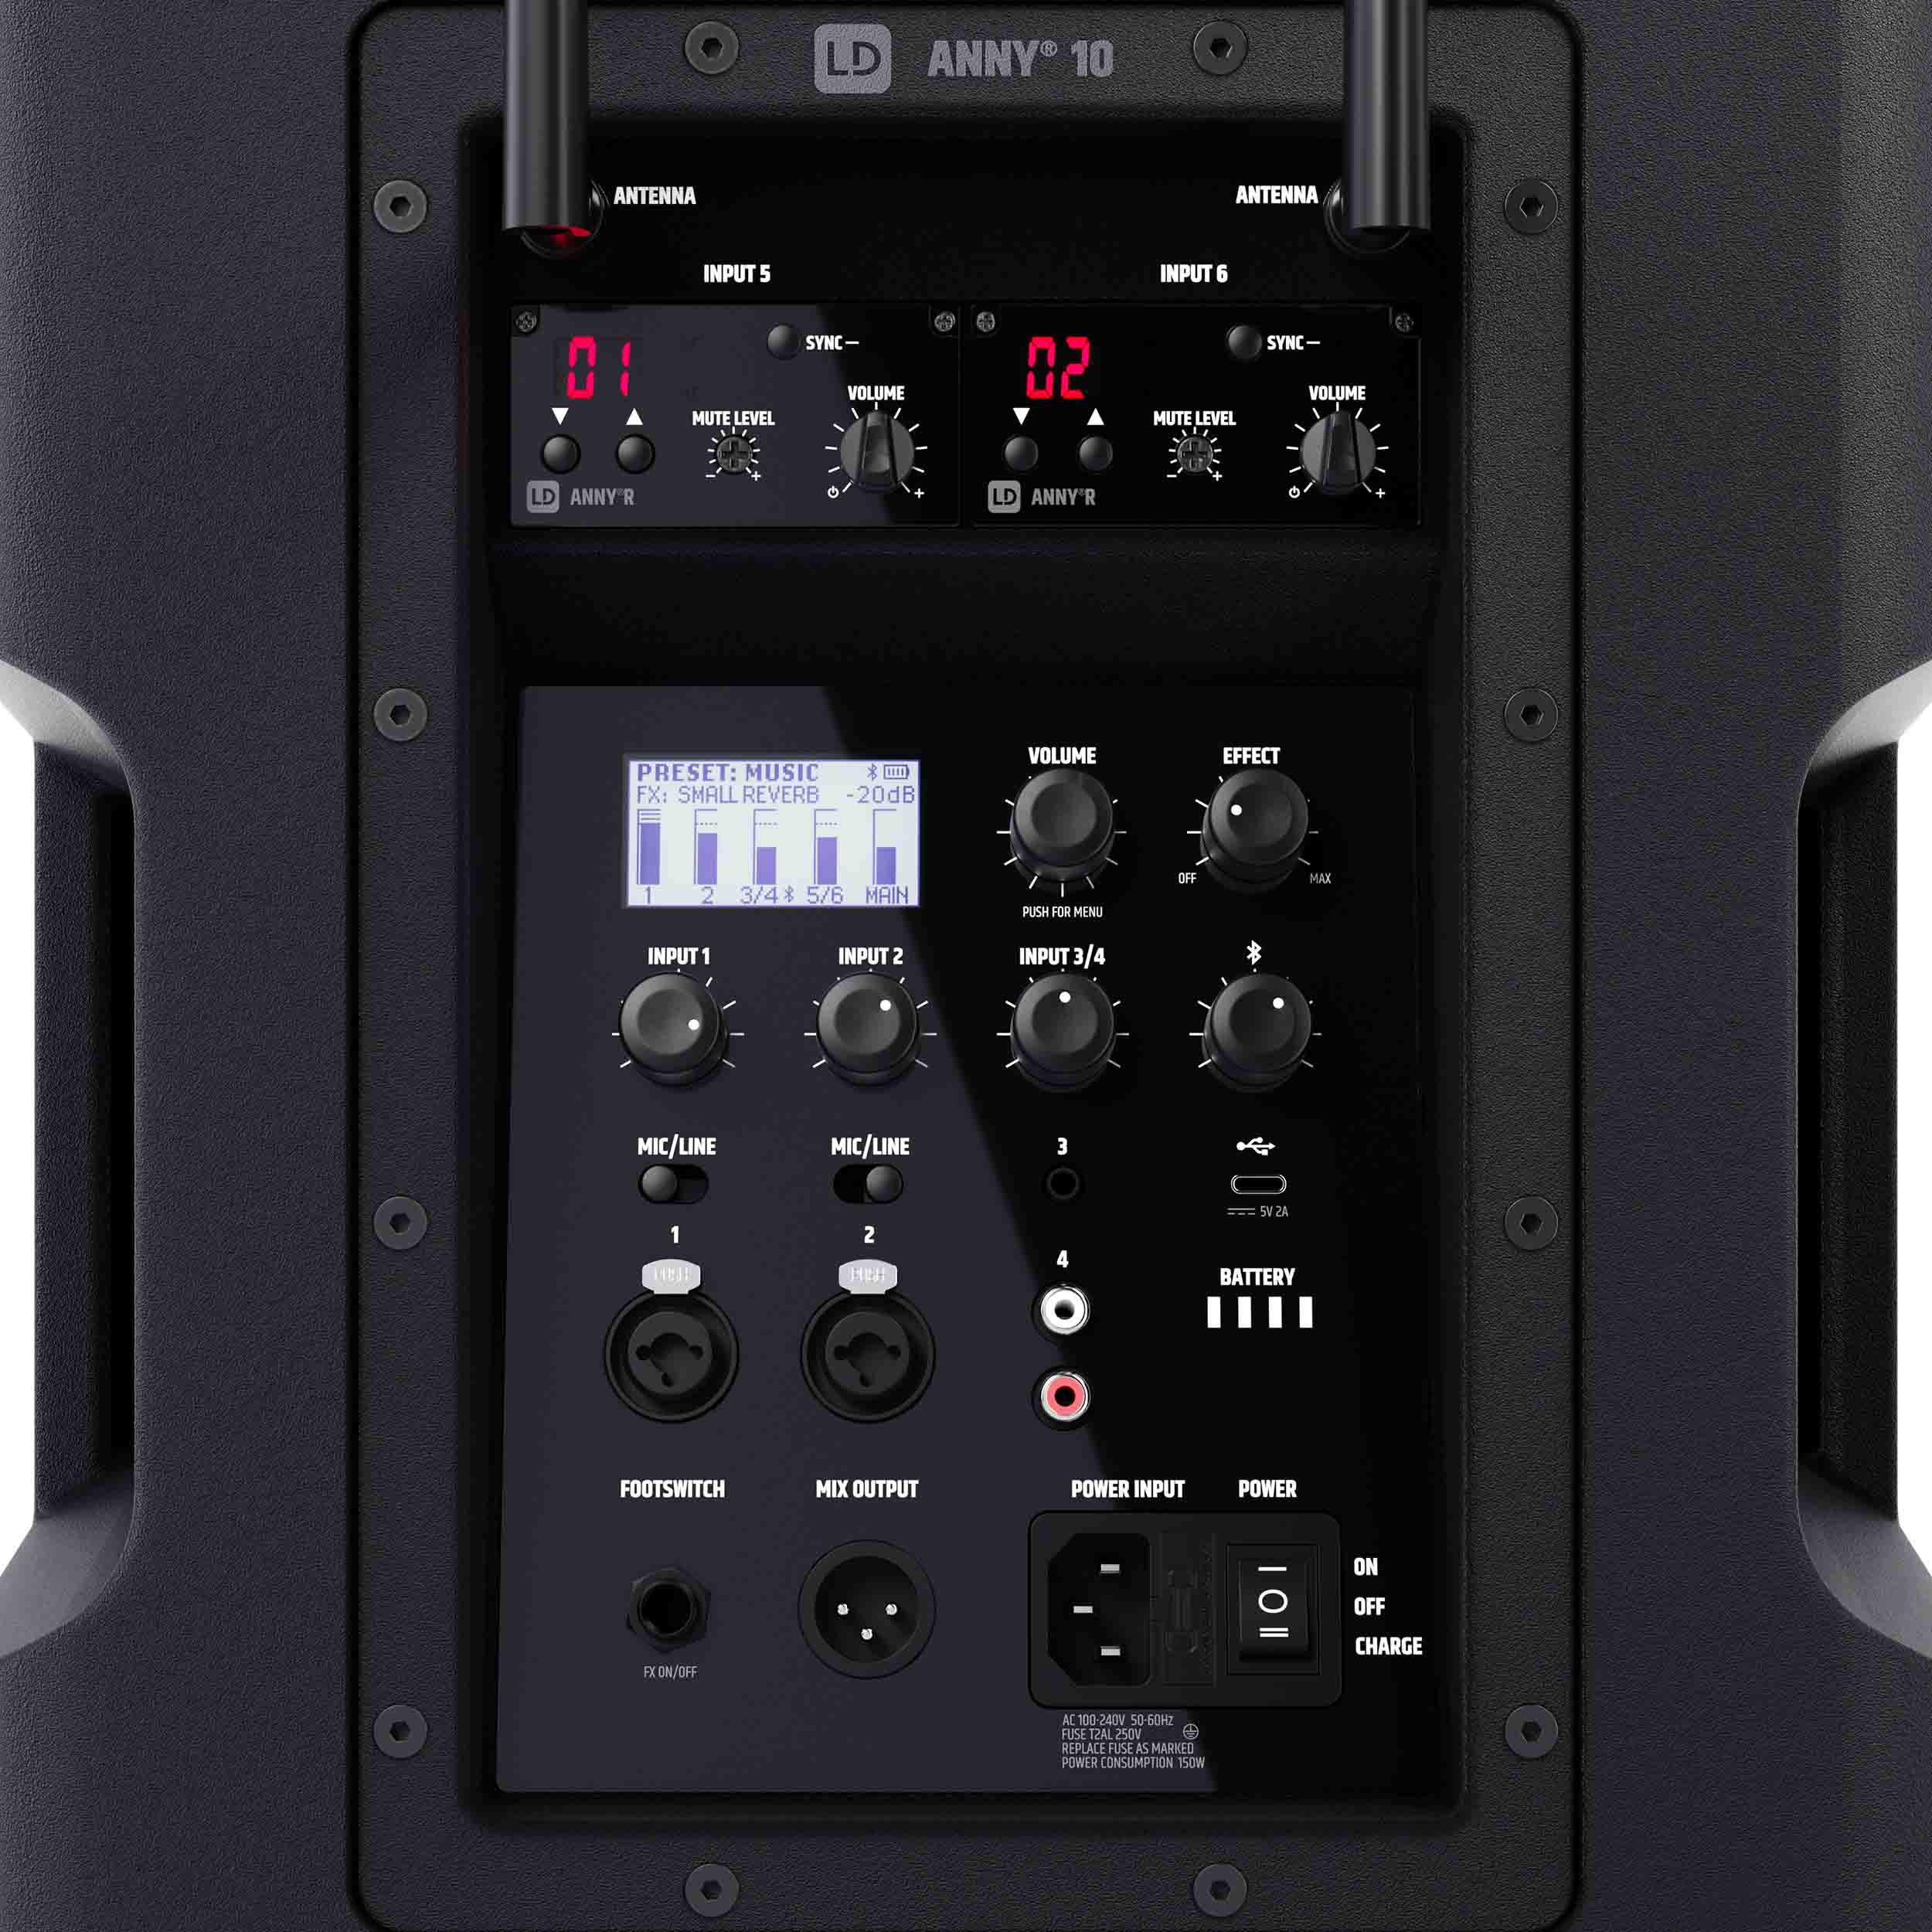 LD System ANNY 10 BPH 2 B4.7, 10" Portable Battery-Powered Bluetooth PA System with Mixer and 2x Headset Microphones Including Bodypacks by LD Systems